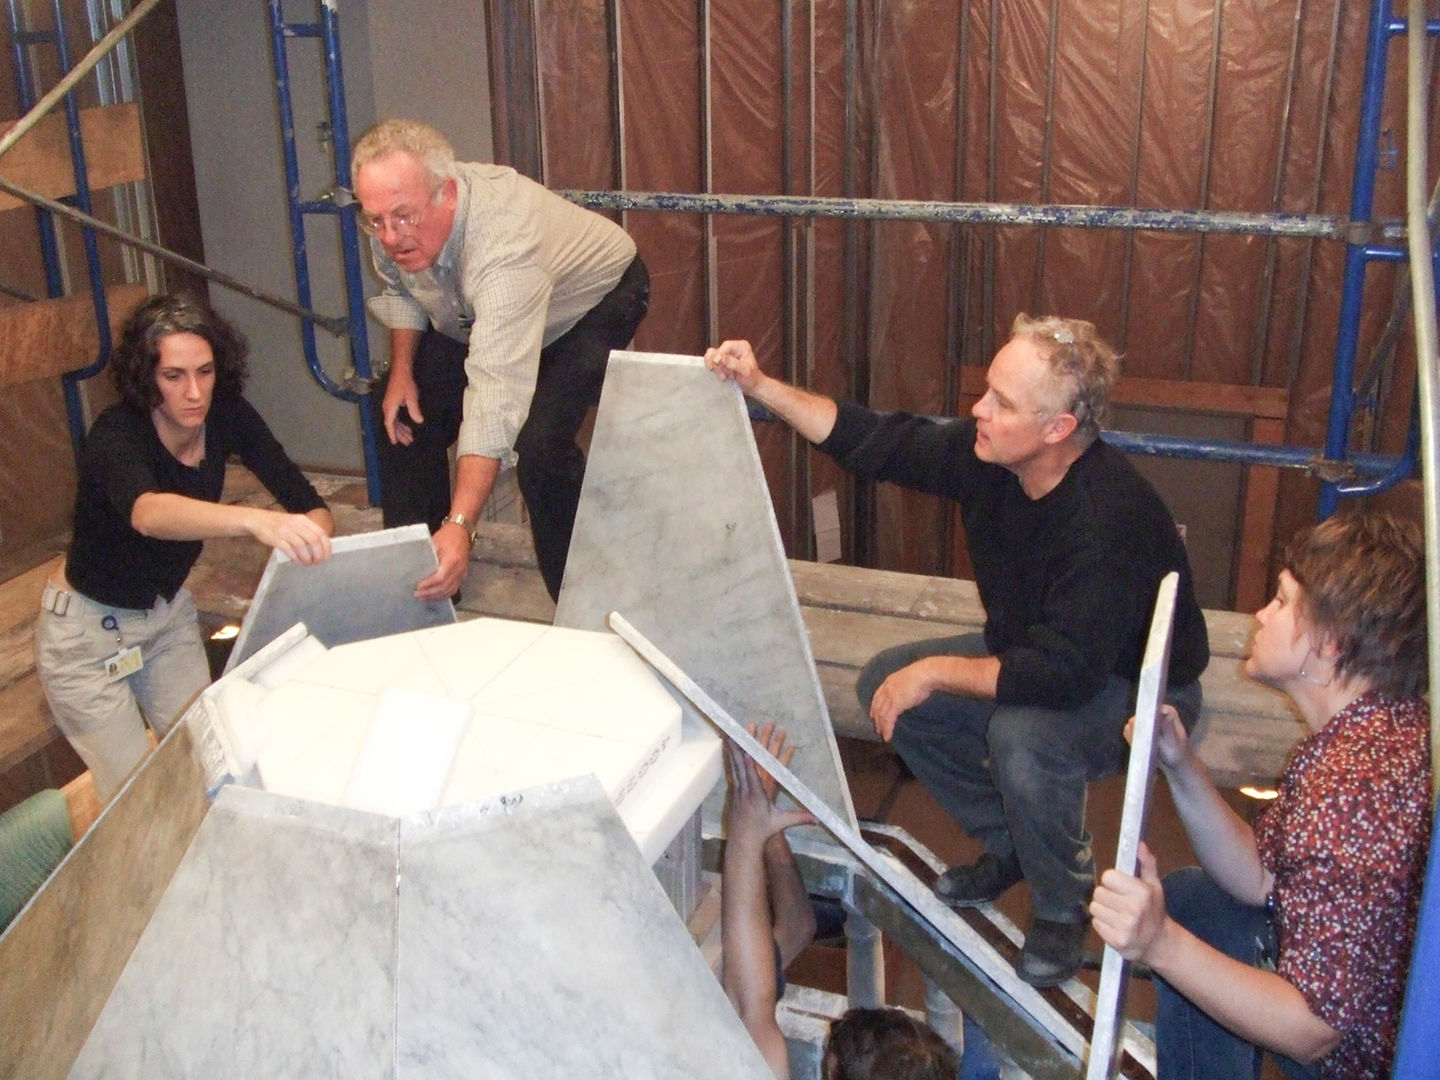 Sari Uricheck, Franz Schmidt, Michael Morris, and Carolyn Riccardelli work together to fit the ciborium's octagonal roof sections into place.